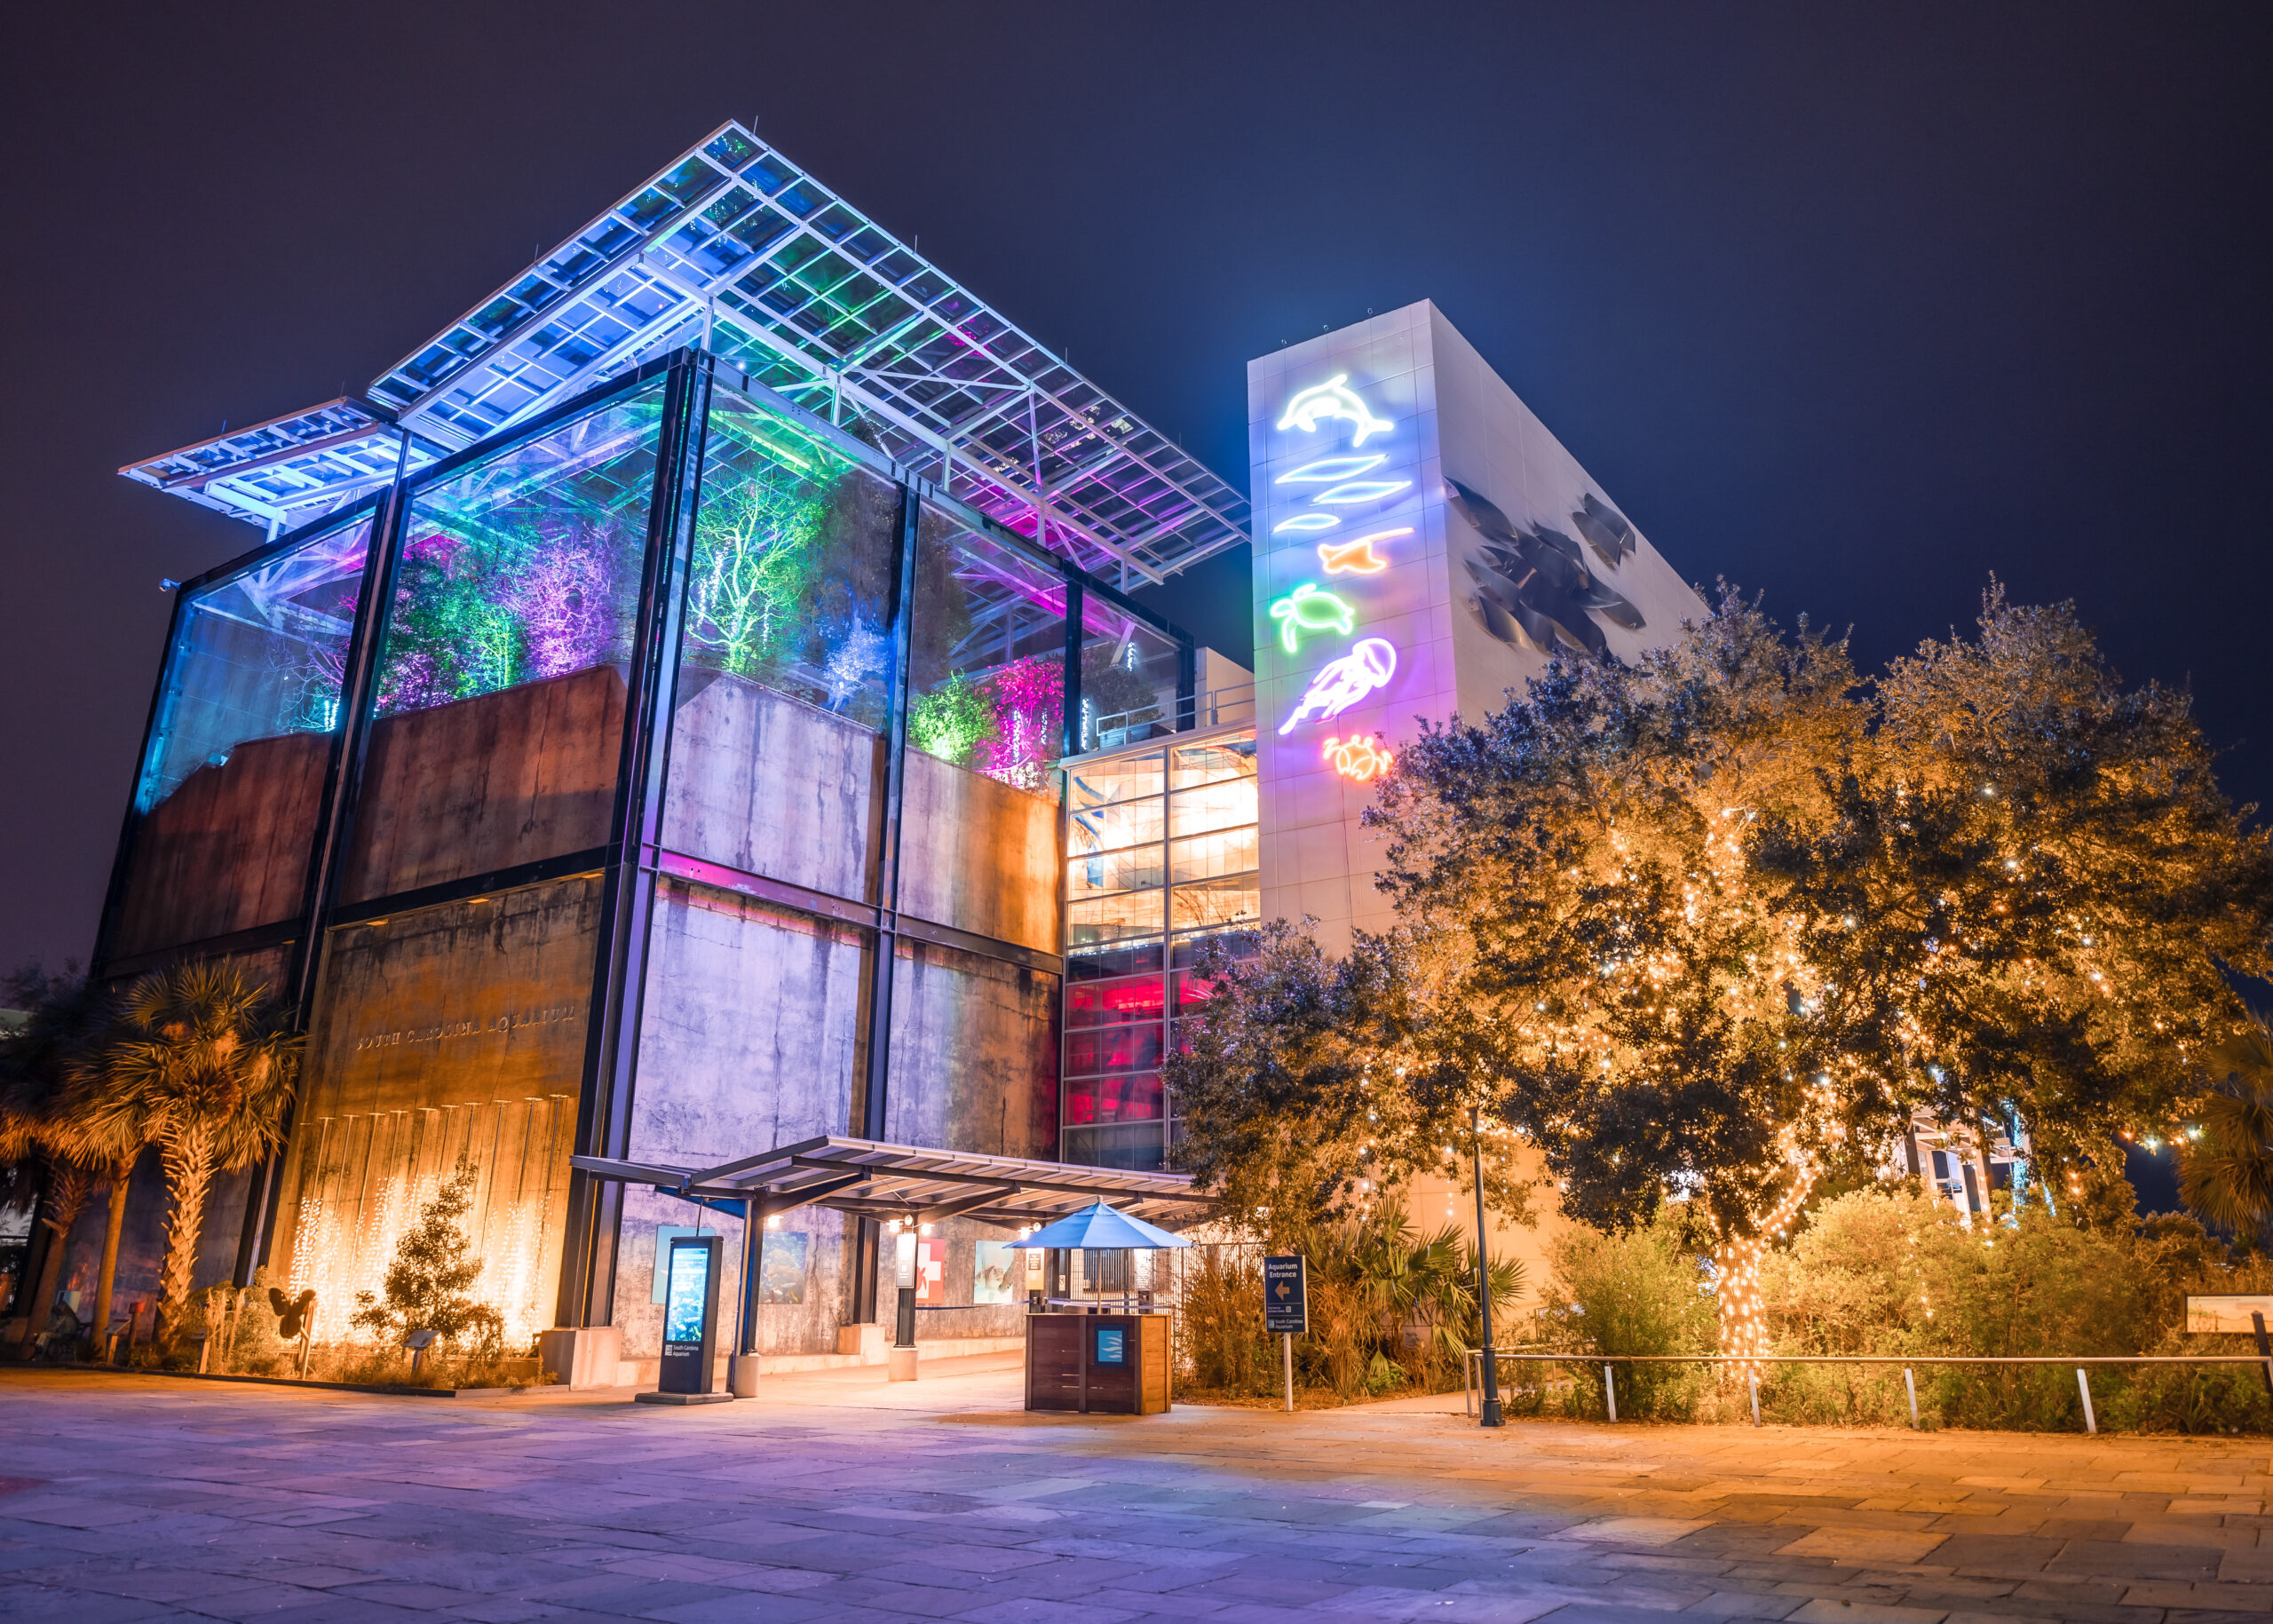 The exterior of the South Carolina Aquarium is shown at night, lit up by colorful blue, green and pink lights at the top, neon lights in animal shapes and gold glowing lights at the bottom and in surrounding trees.